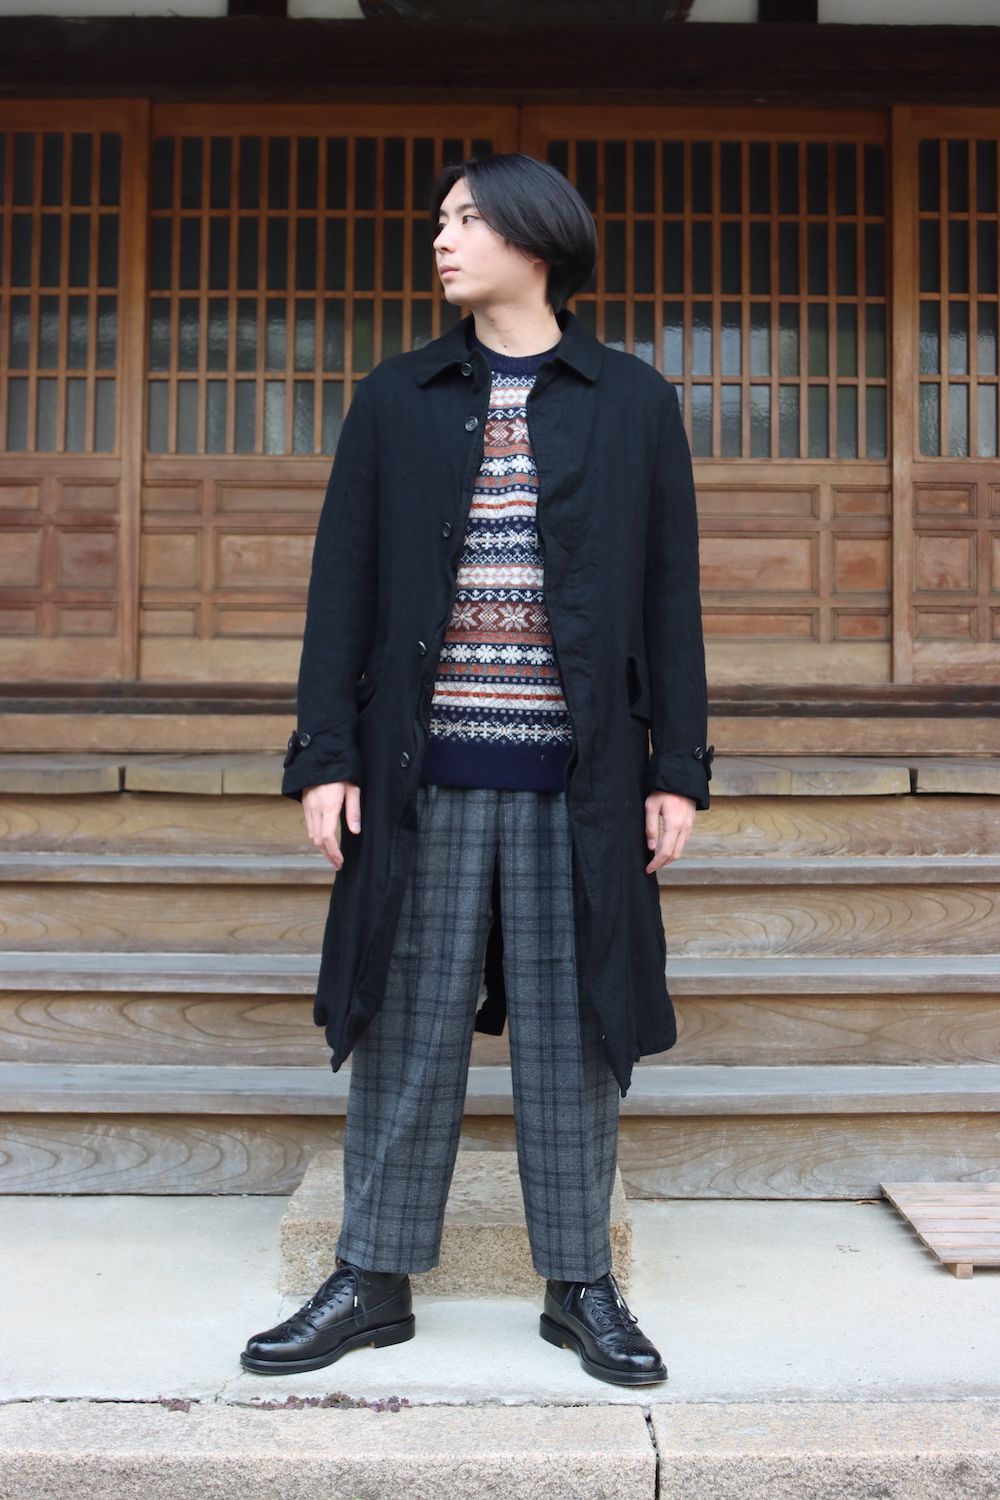 COMME des GARCONS HOMME 21AW ウールサージ縮絨コート(HH-C009) style.2021.11.6. 2062  mark